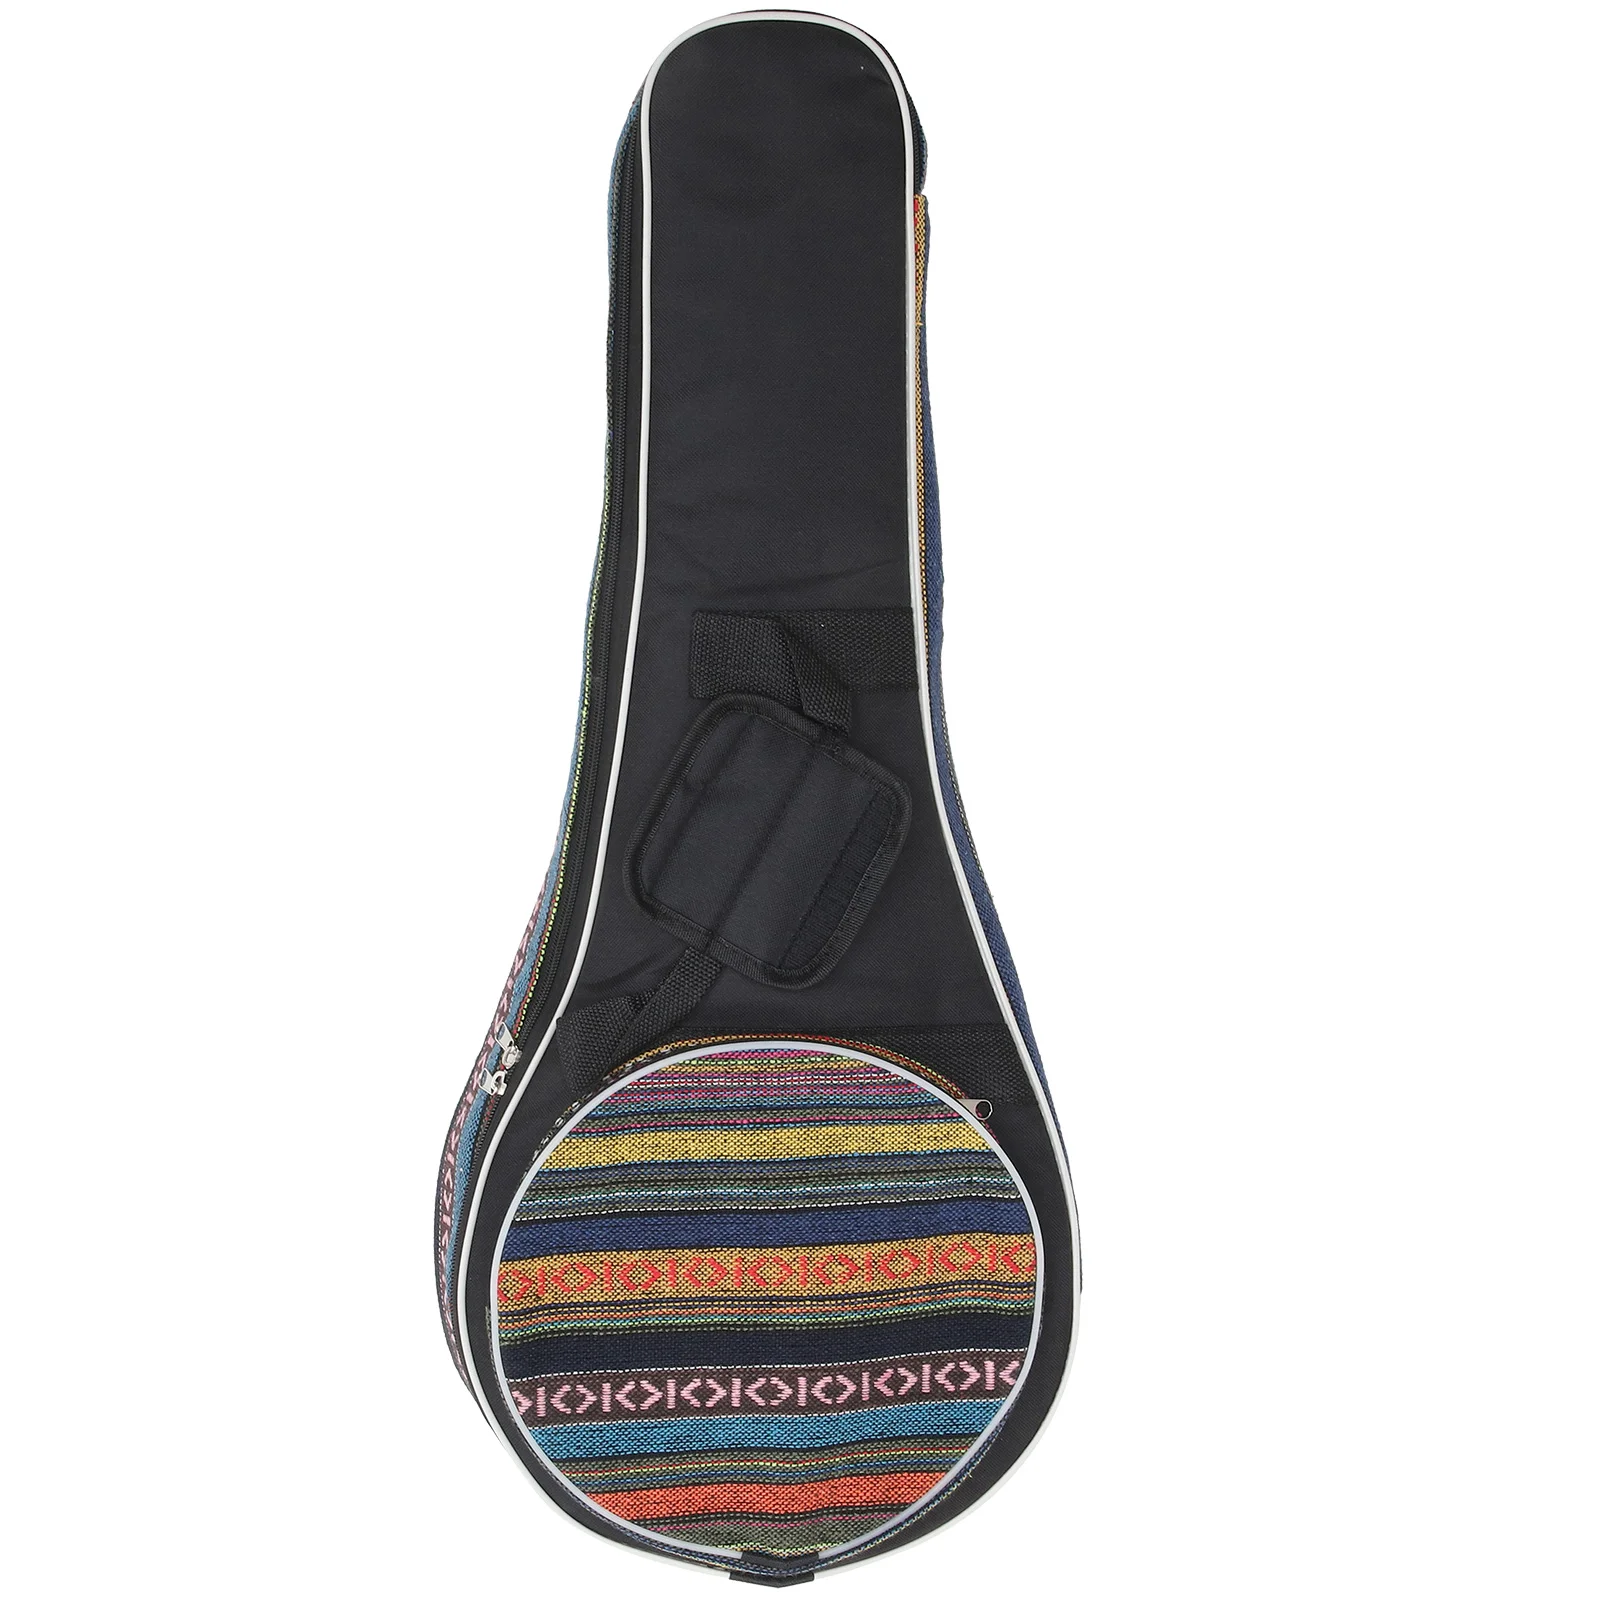 

Mandolin Bag Storage Chic Organizer Traveling Guitar Case Pouch Oxford Cloth Thickened Portable Package Music Accessories